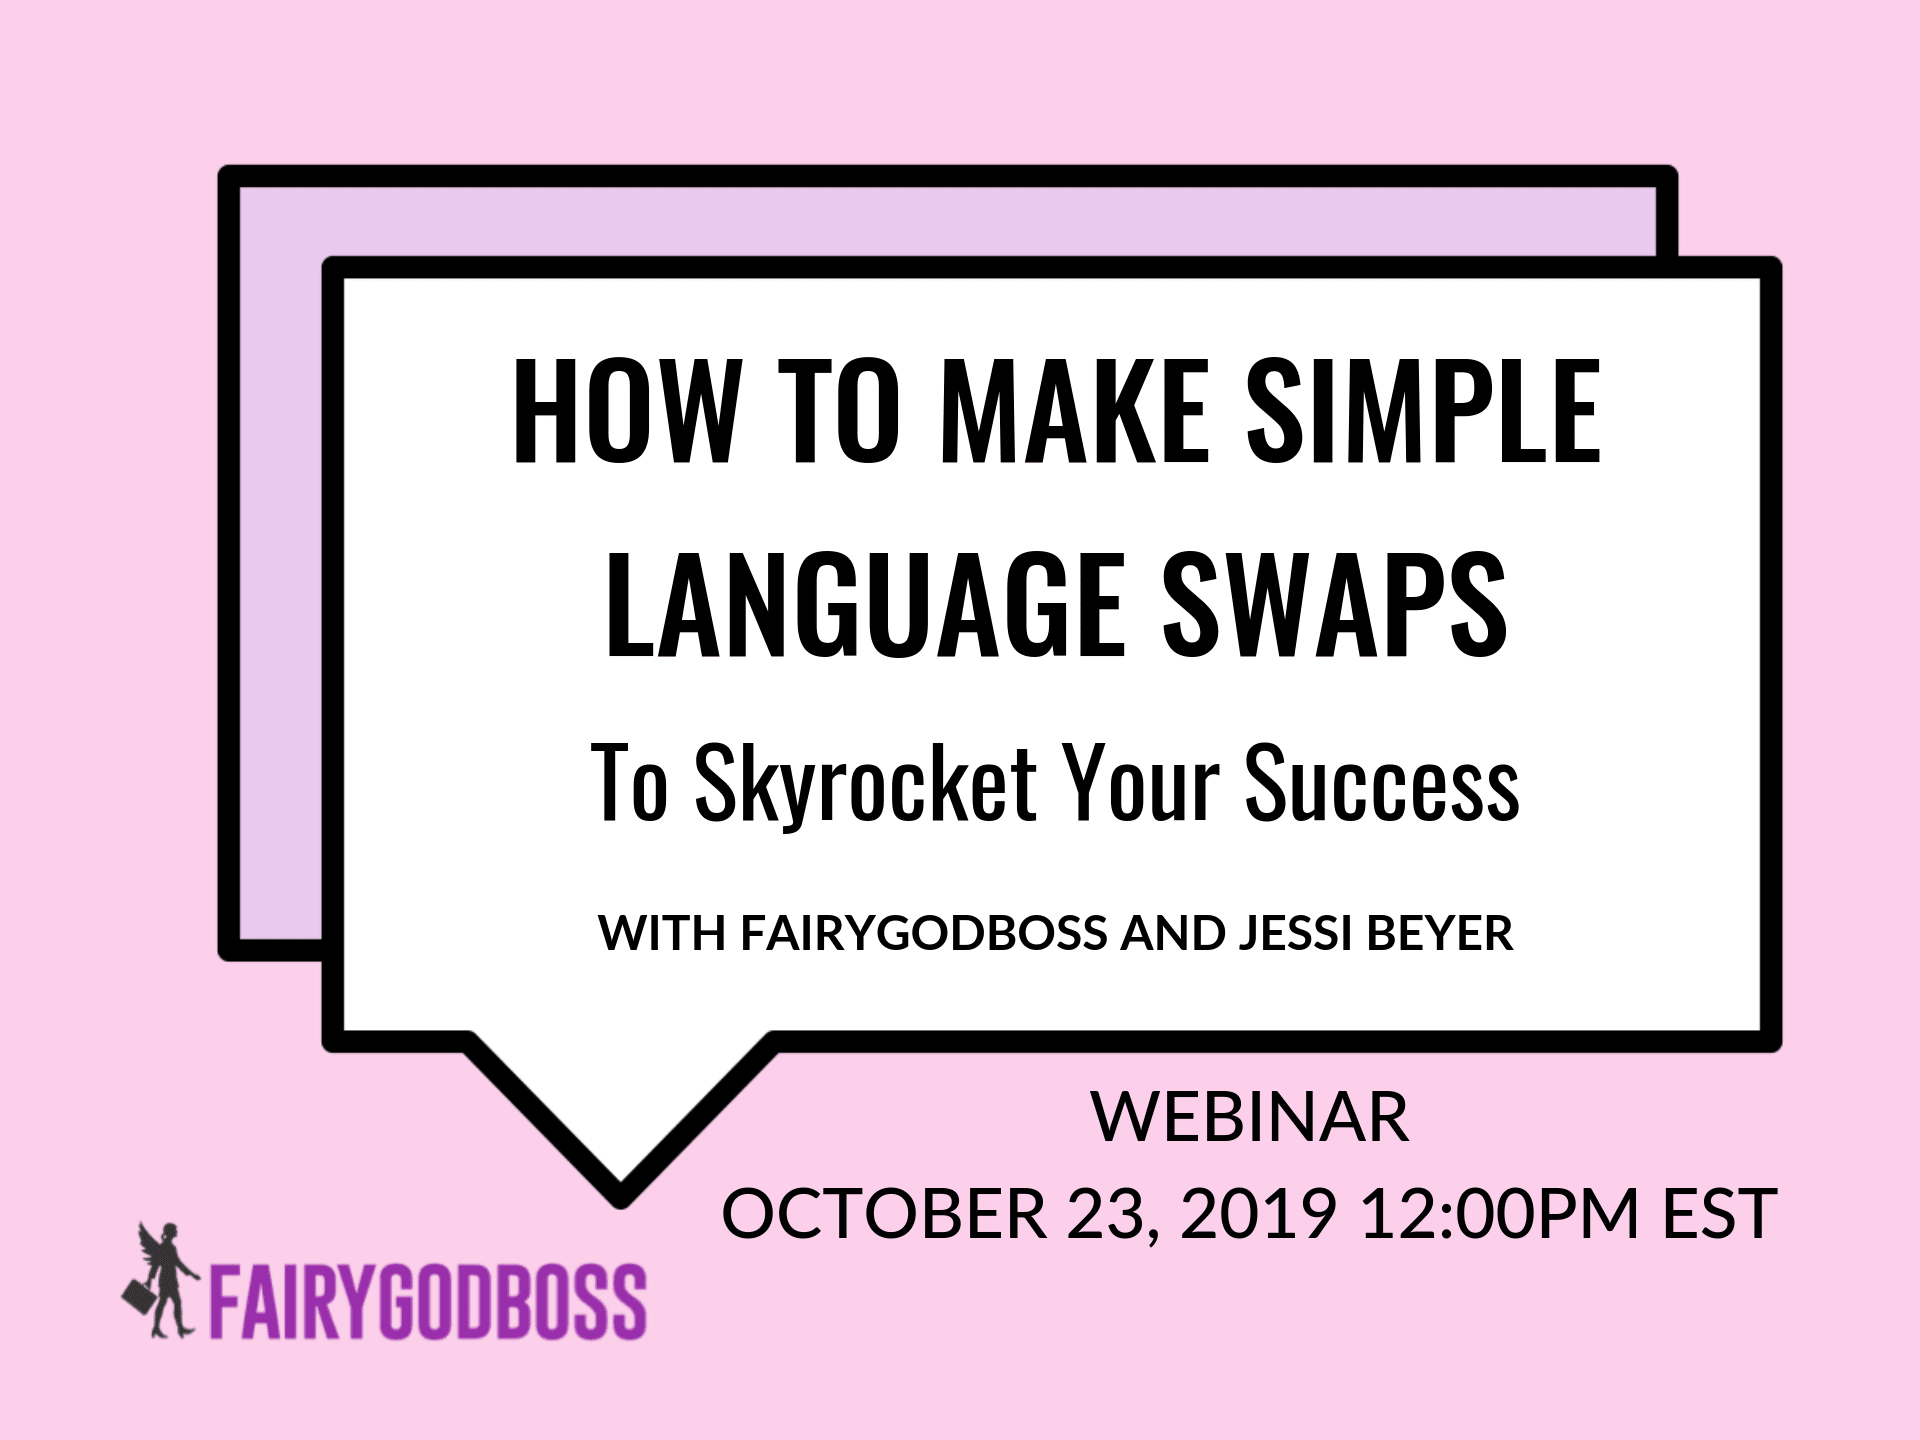 How To Make Simple Language Swaps To Skyrocket Your Success